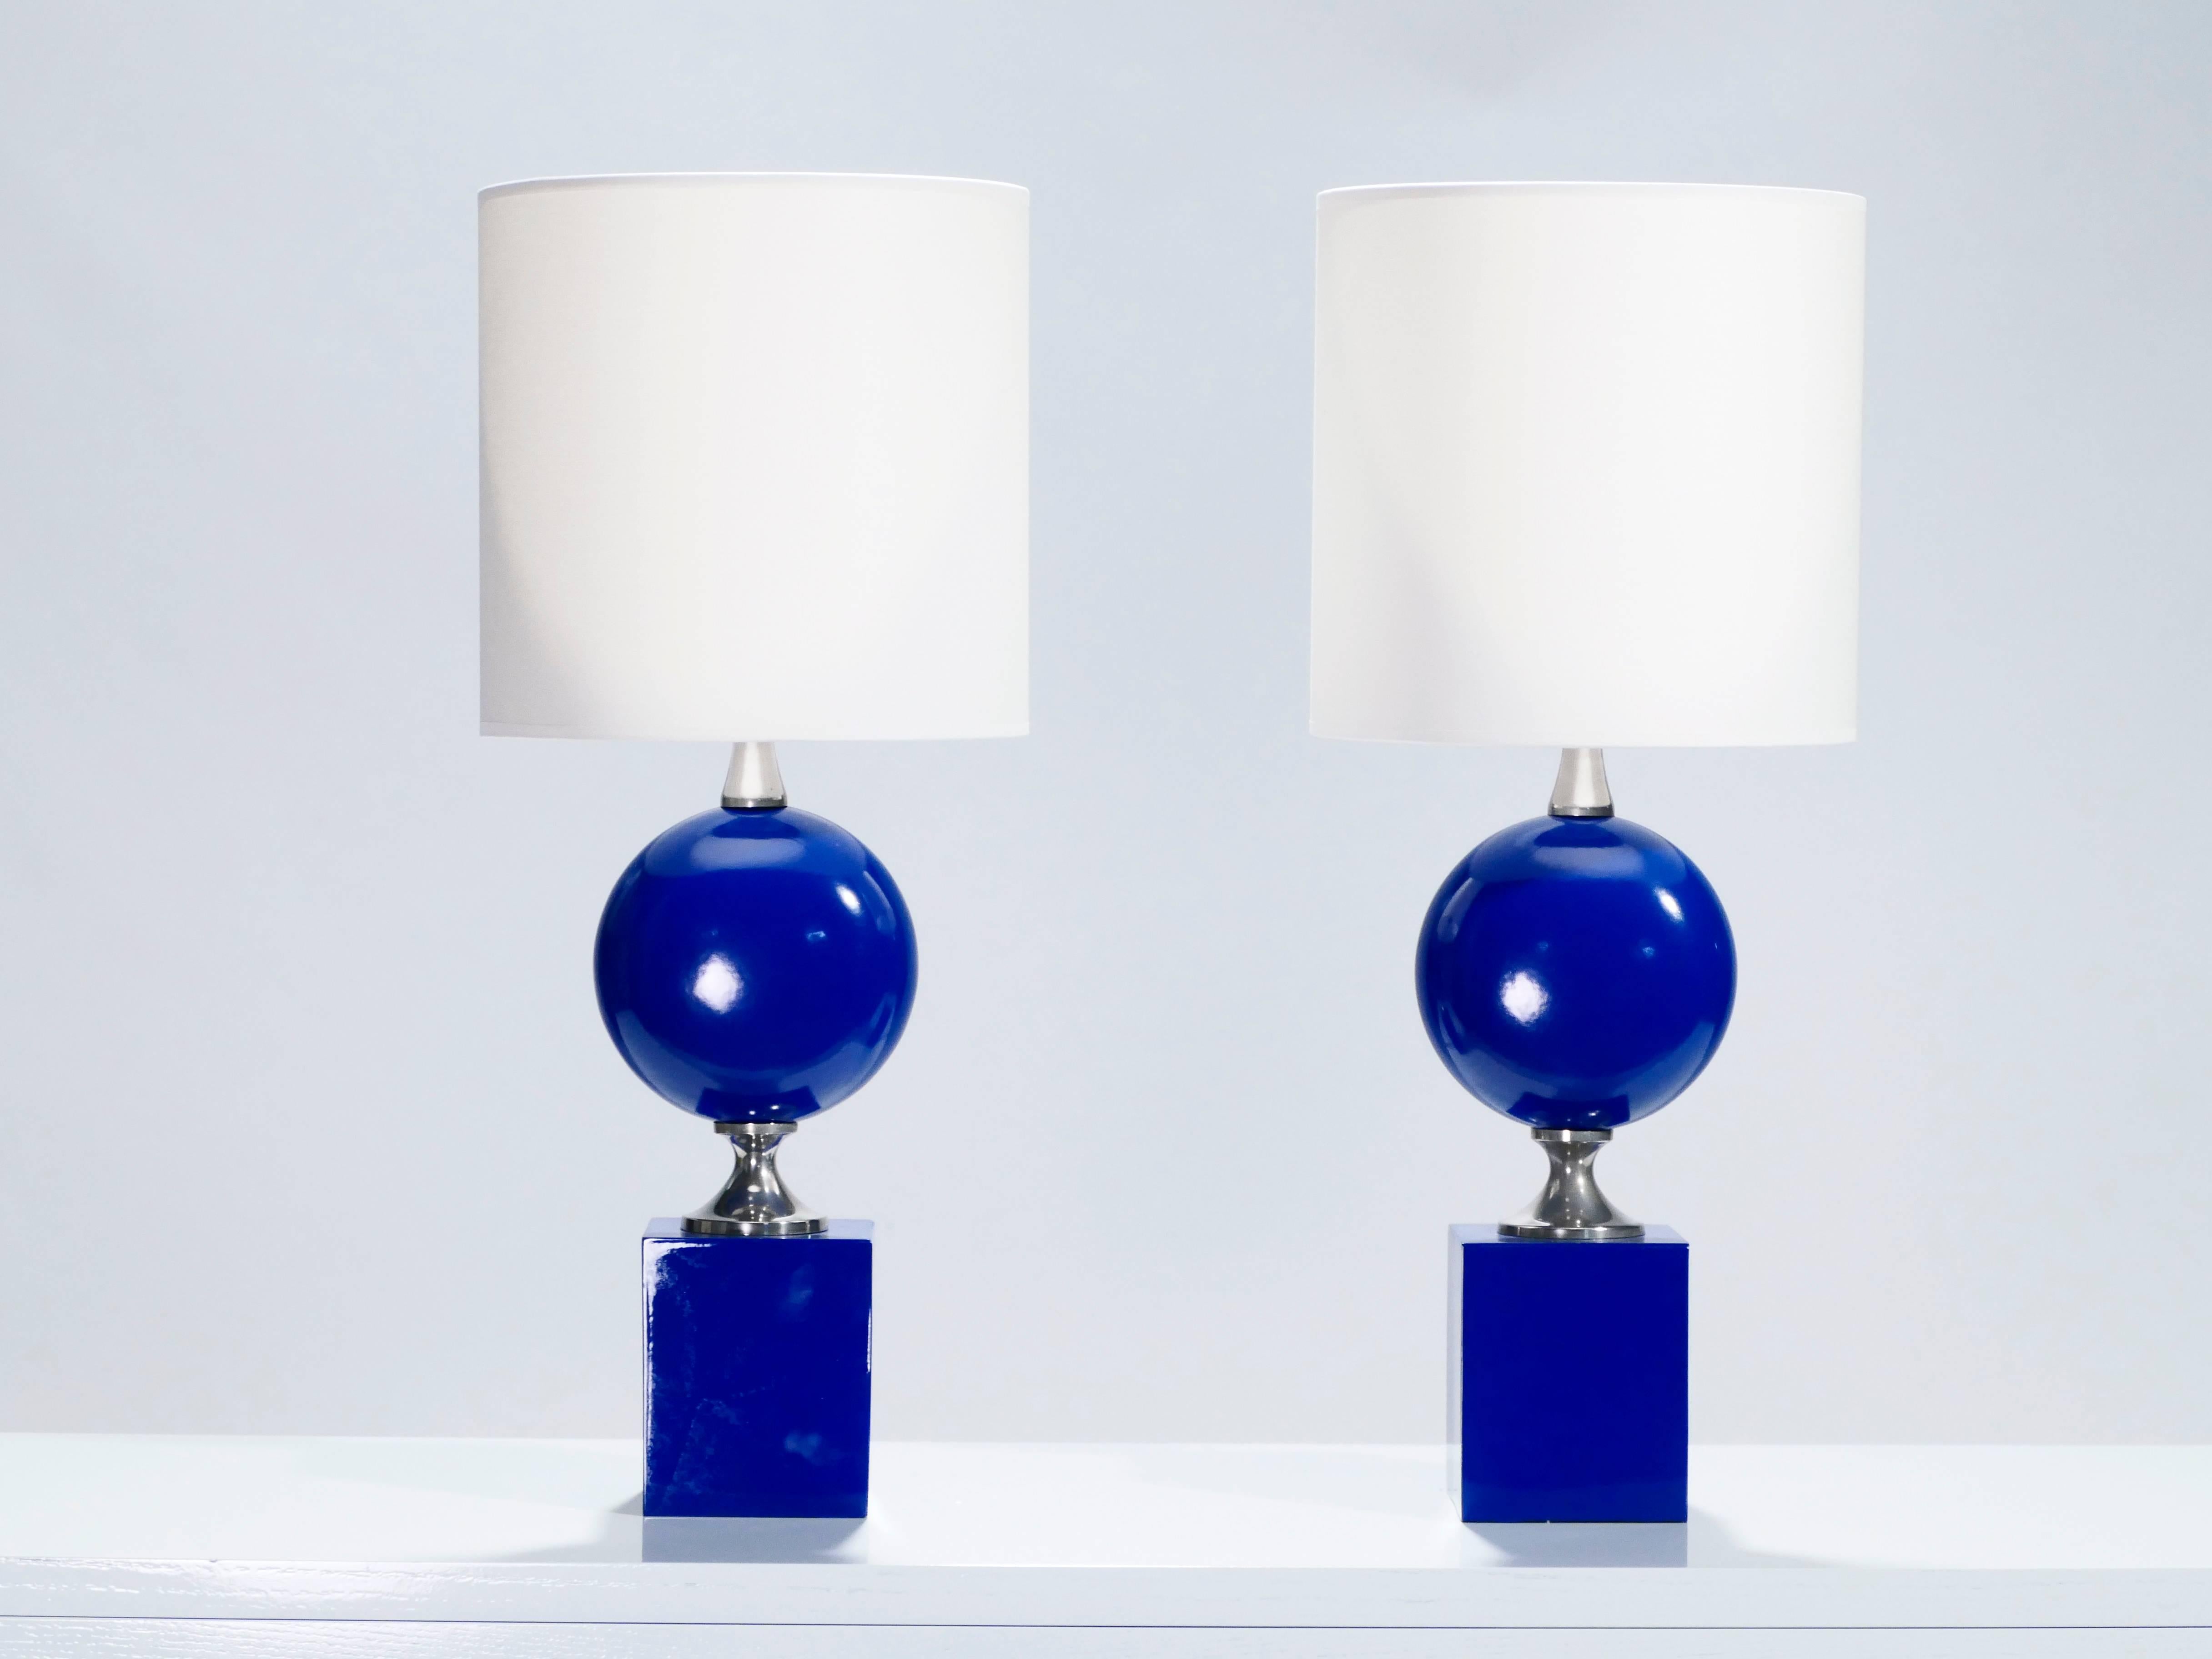 Electric blue is not a color you come across often in bedside lamps. This Mid-Century Modern pair was designed by French lighting artist Philippe Barbier in the 1970s and with its bulbous midsection topping a thick square base, is typical of his